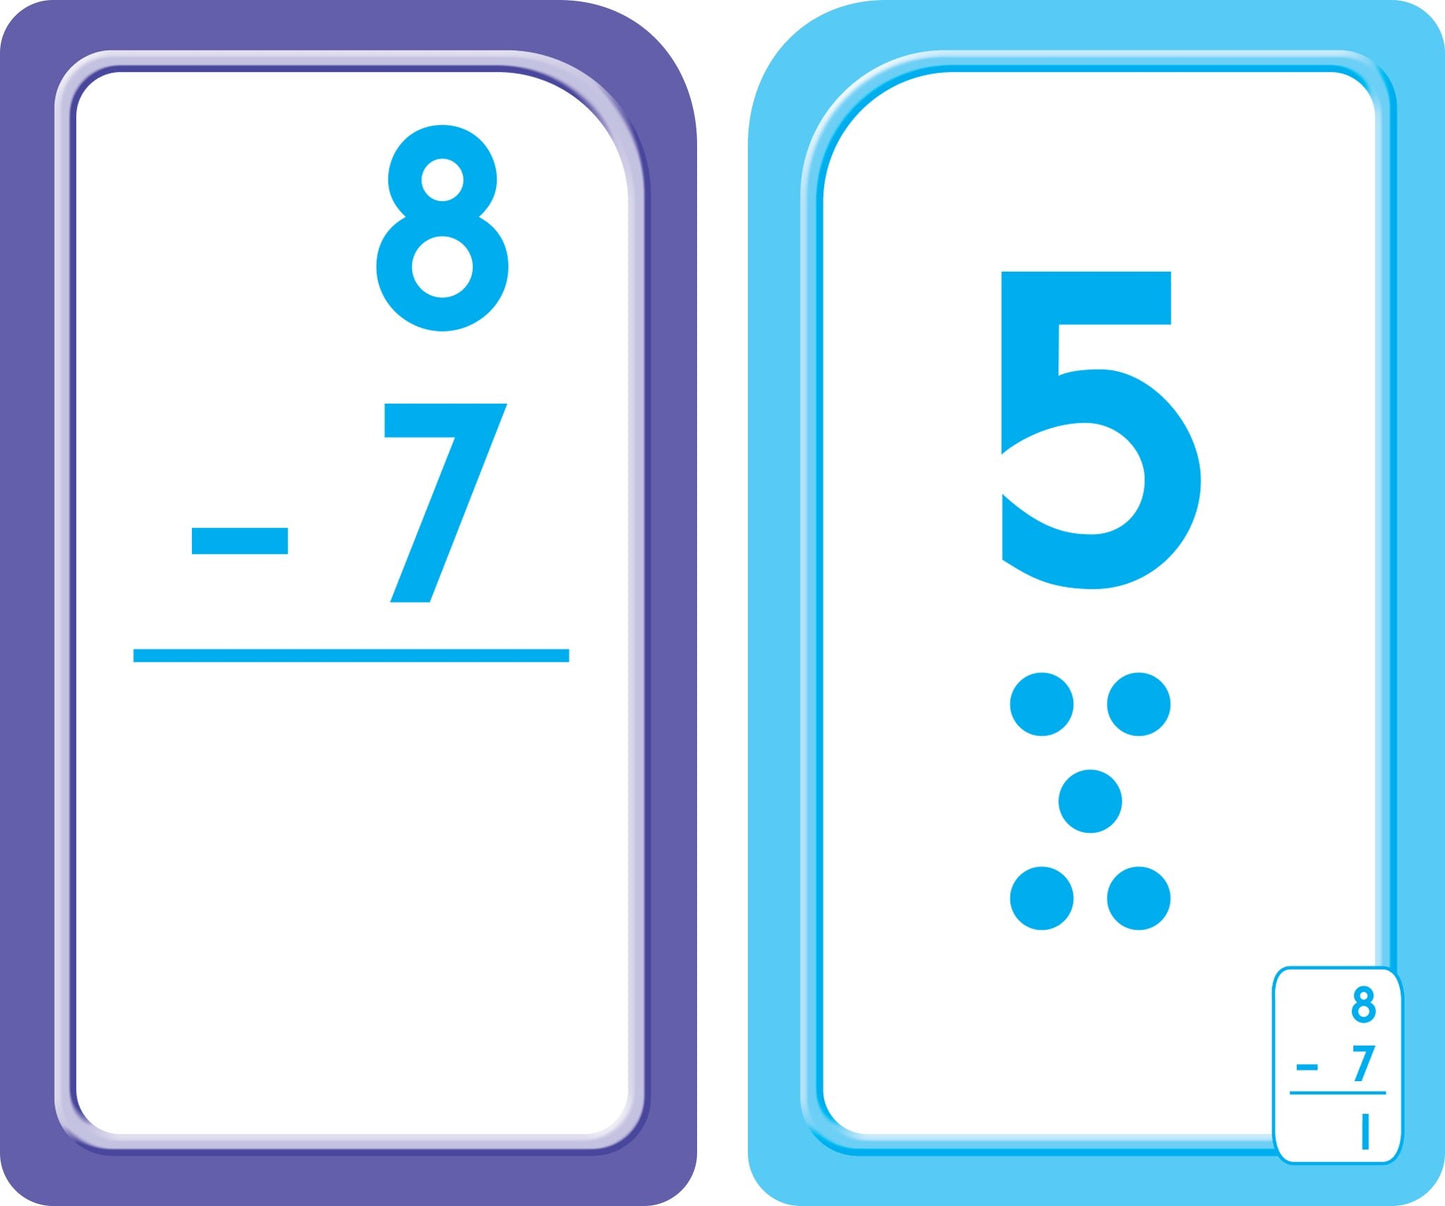 Subtraction 0-12 Flash Cards - Ages 6 and Up, 1st Grade, 2nd Grade, Numbers 0-12, Math, Problem Solving, Subtraction Problems, Counting